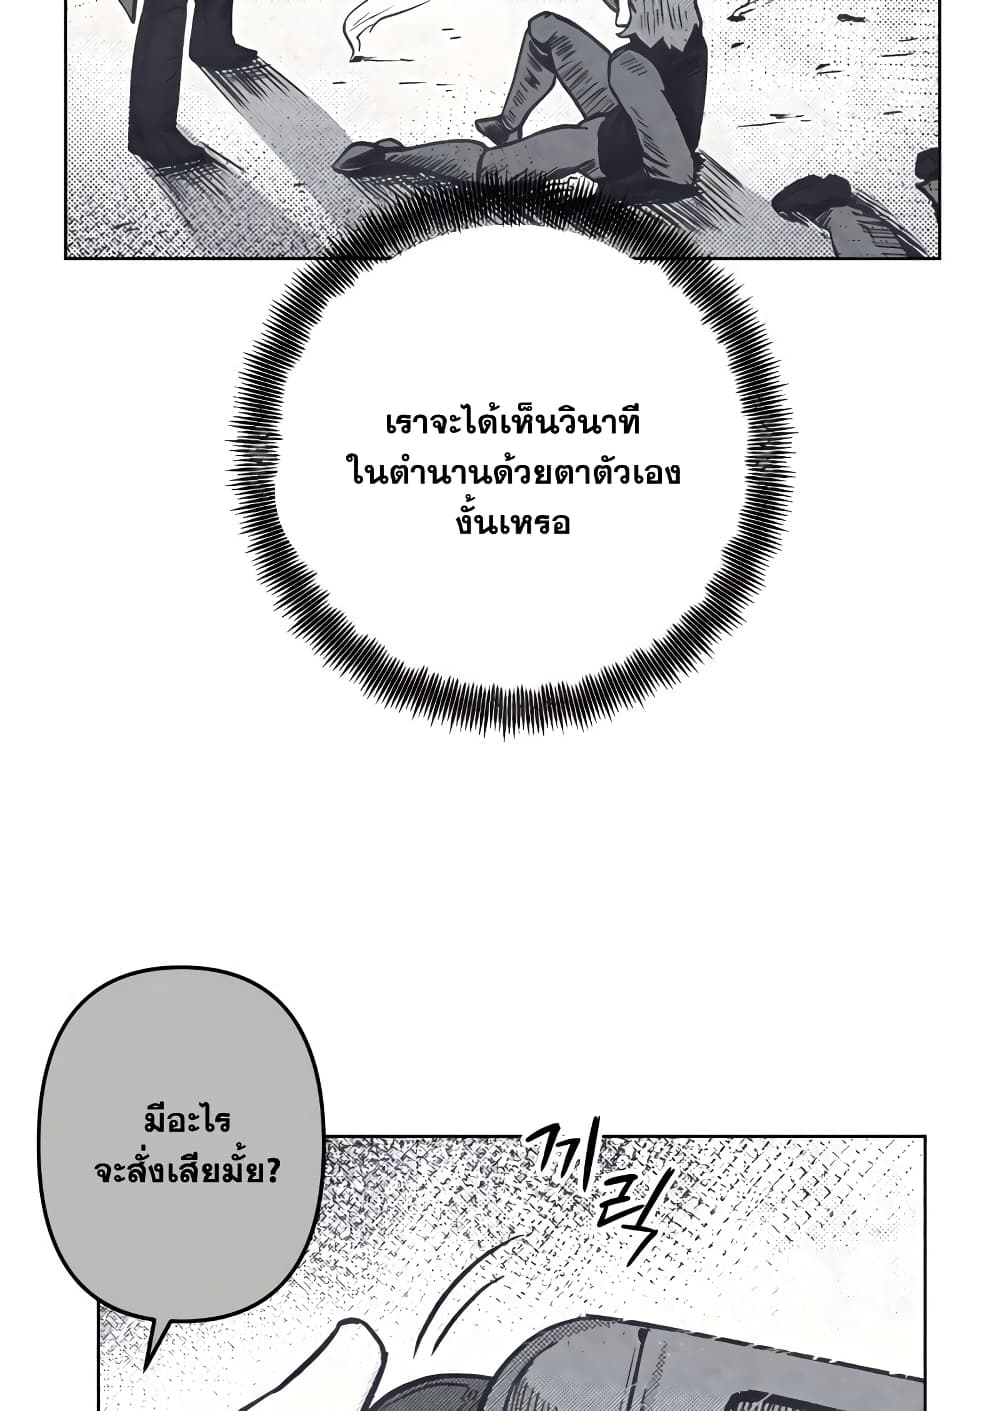 Surviving in an Action Manhwa ตอนที่ 4 (49)